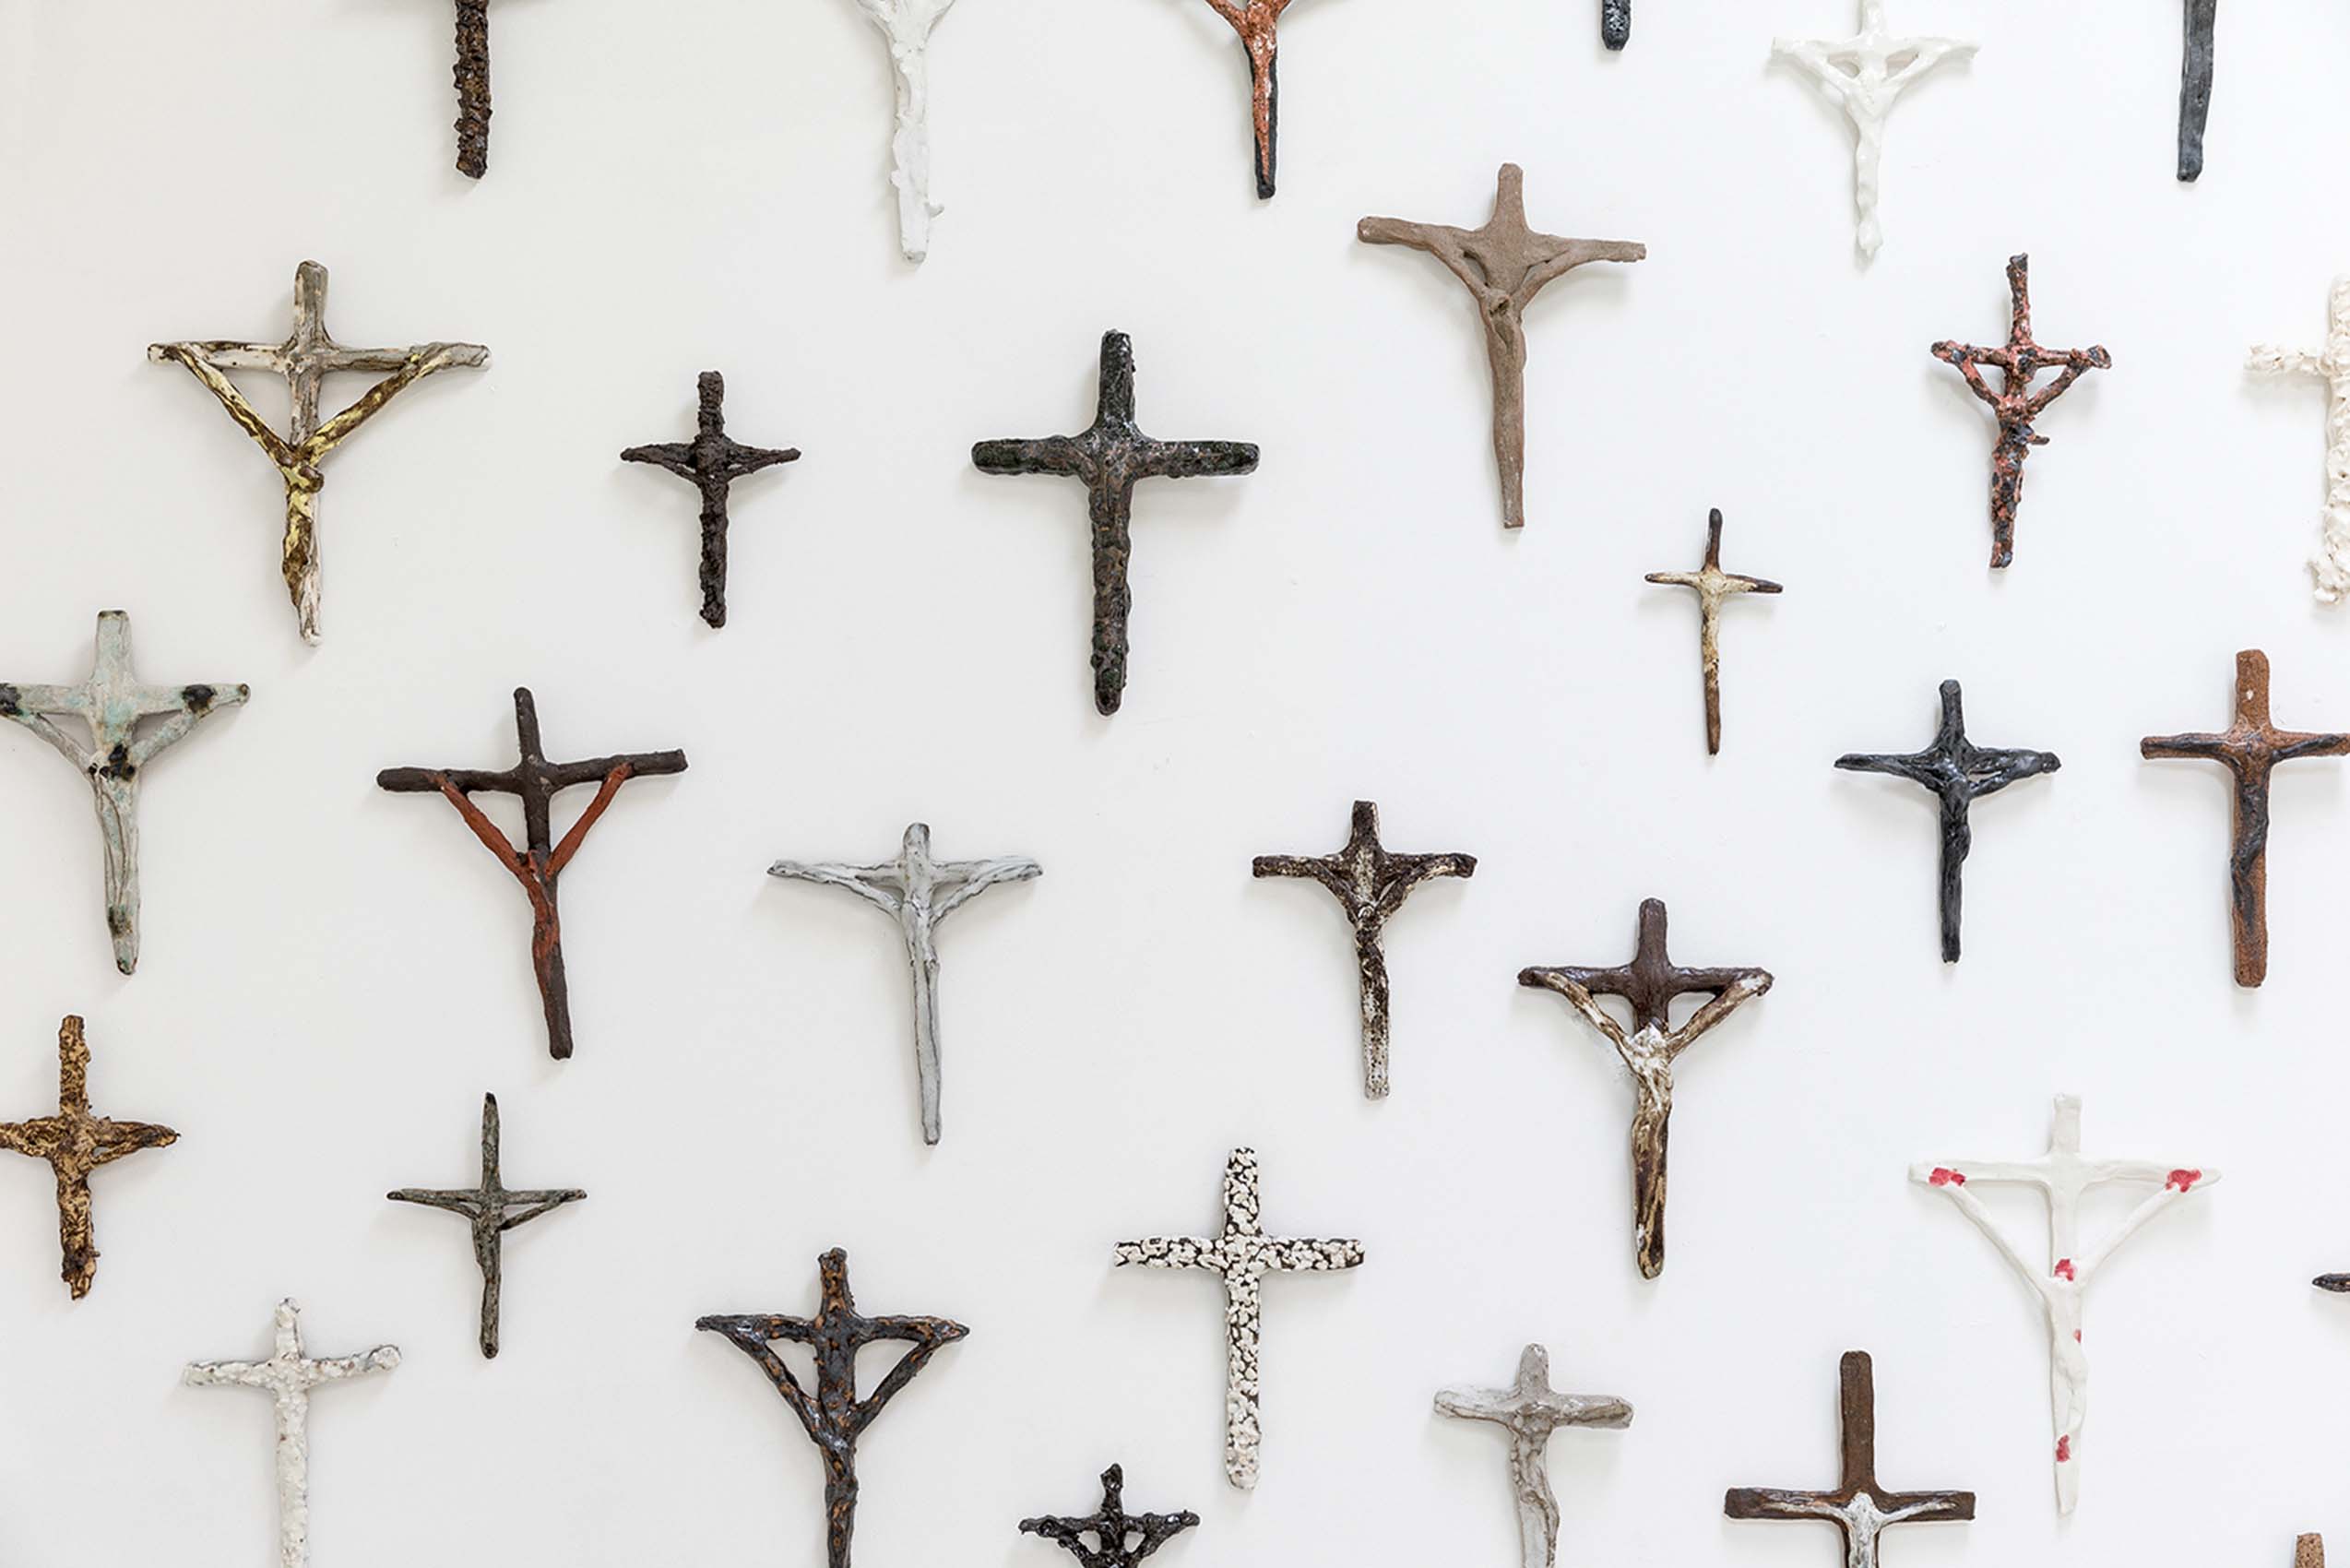 Richard Lewer, ‘Crucifixes’ (detail), 2018, fired stoneware. © Richard Lewer. Courtesy the artist and Hugo Michell Gallery. Photo: Andrew Curtis